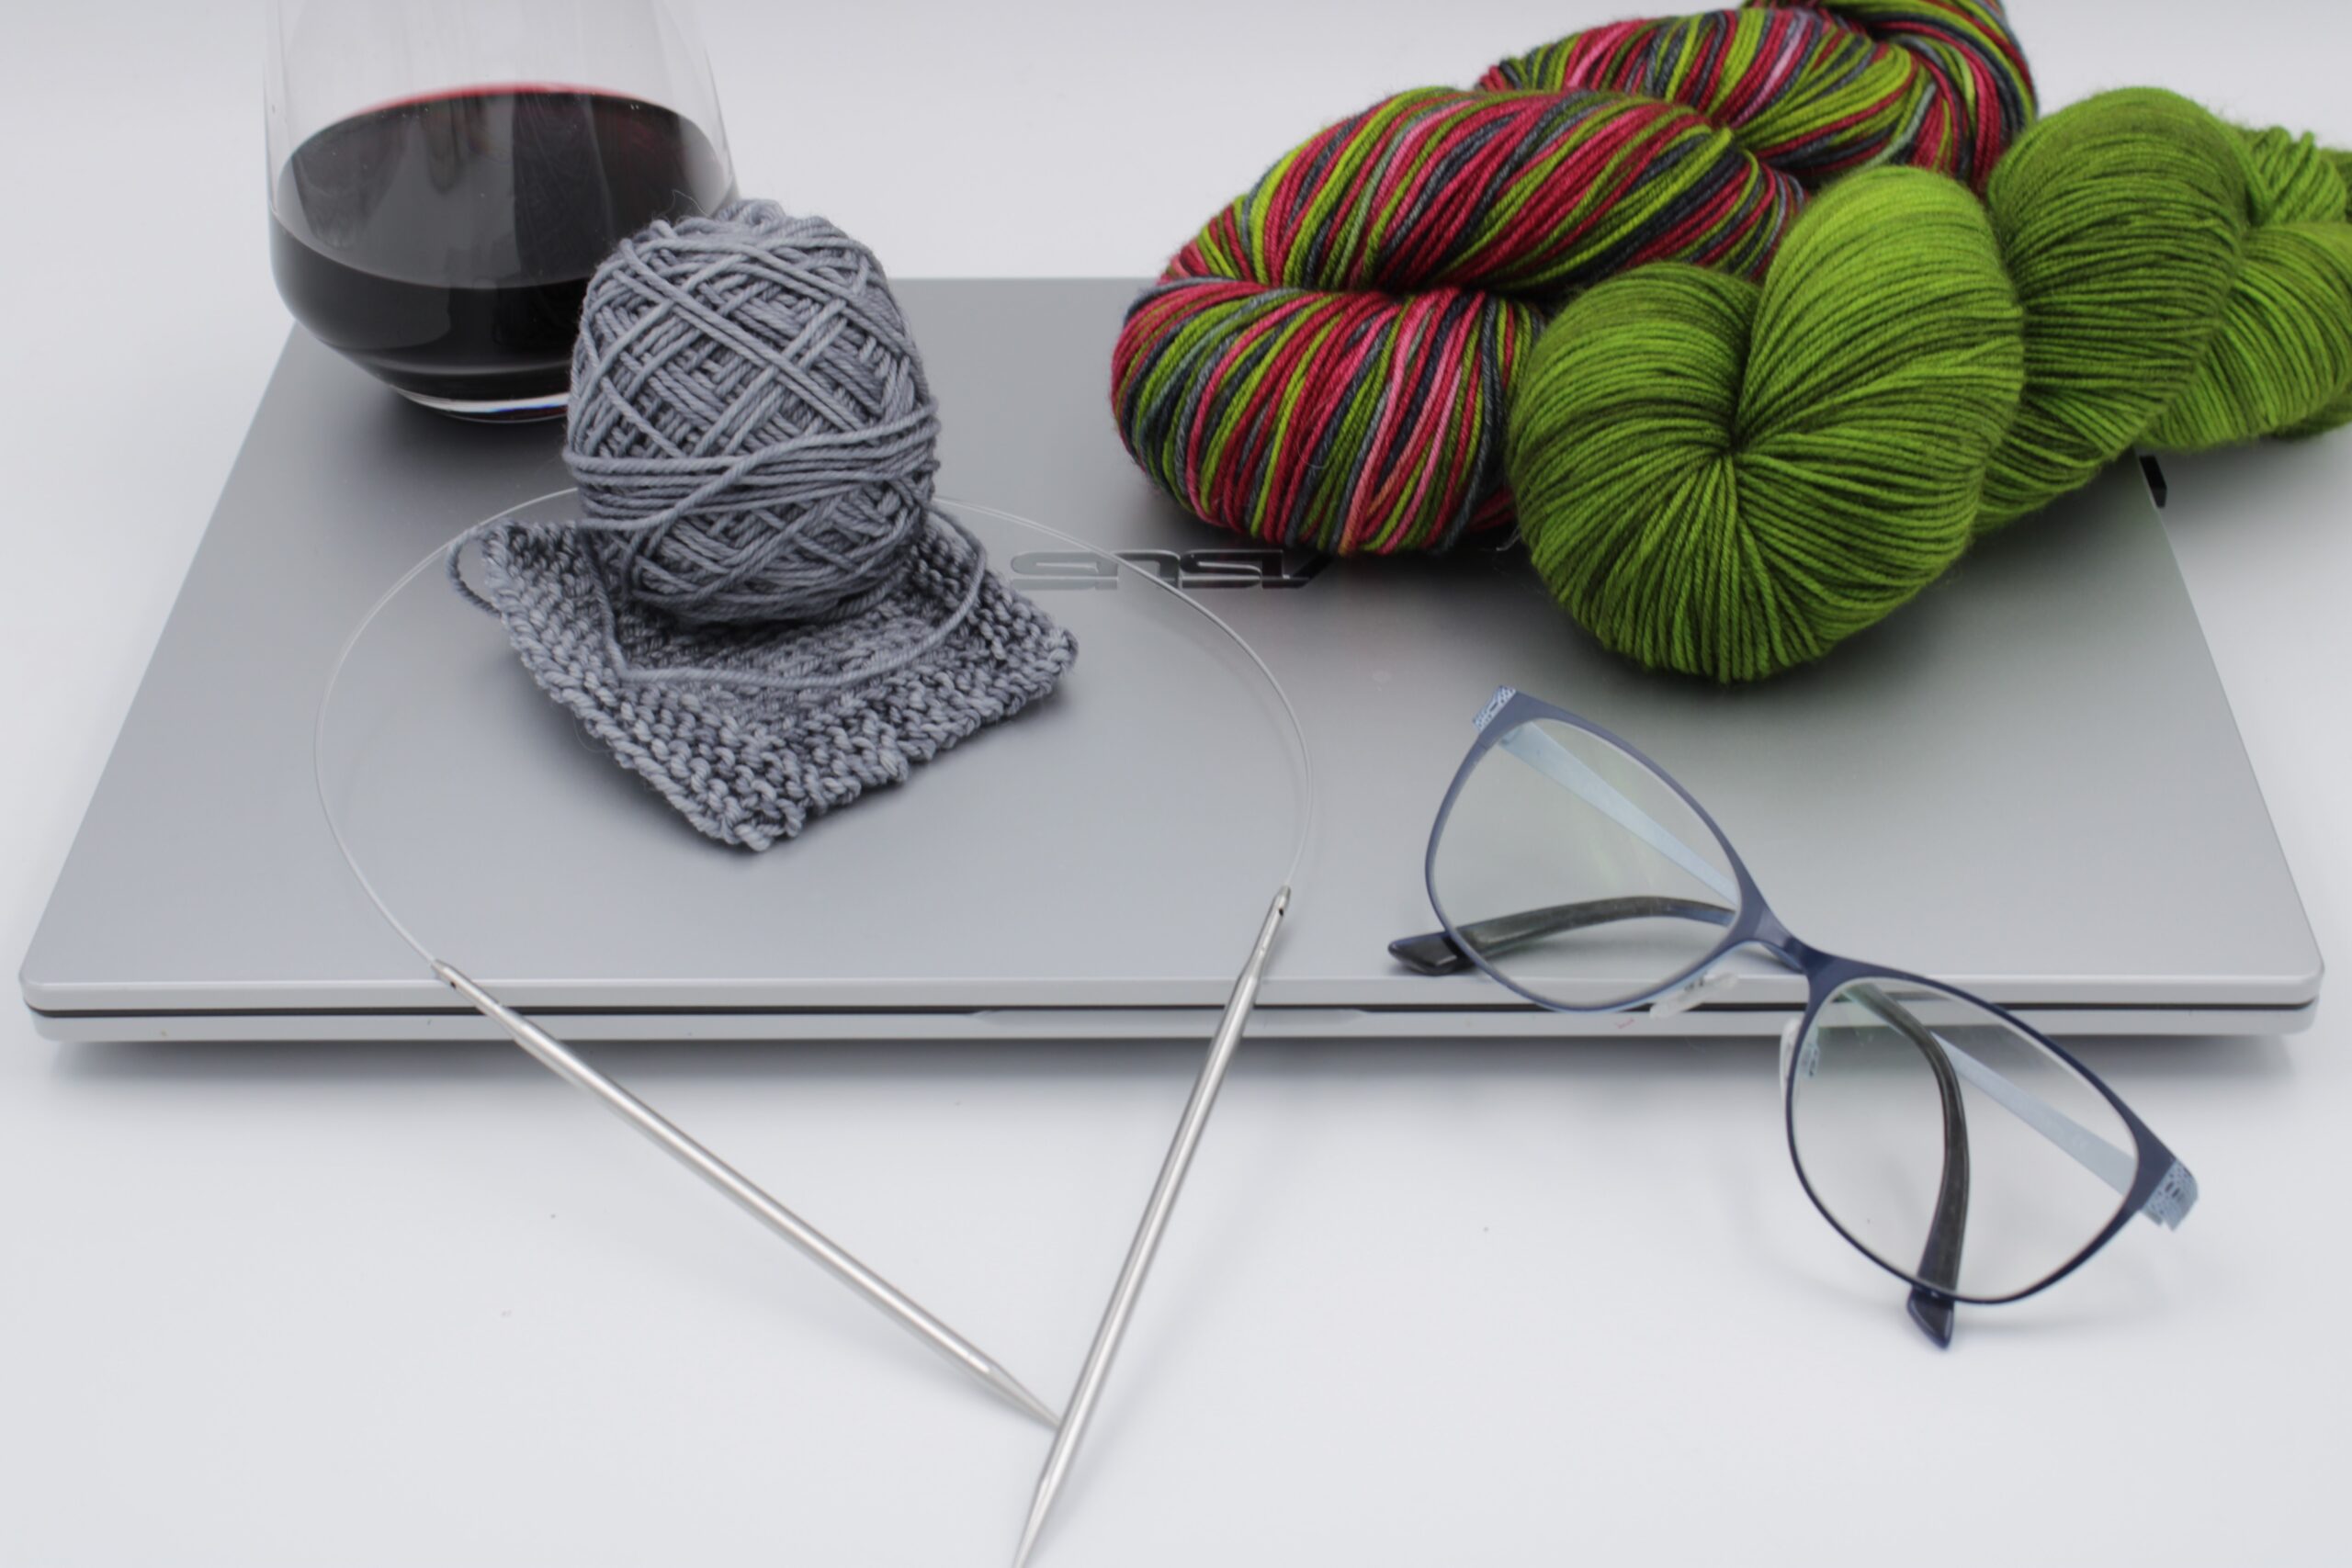 Learn to knit with easy knitting.